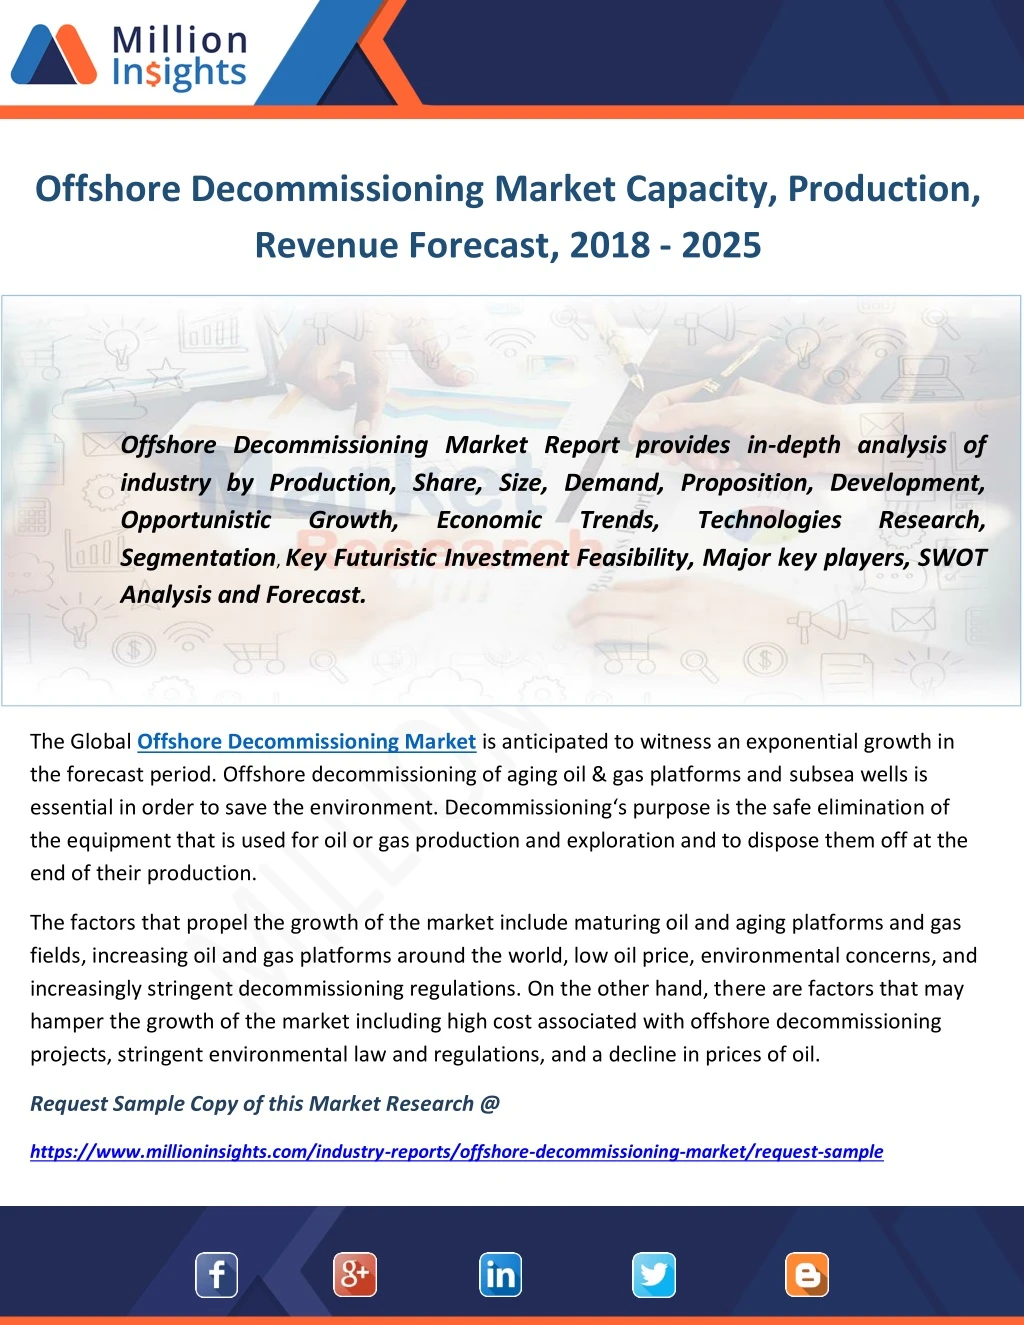 offshore decommissioning market capacity